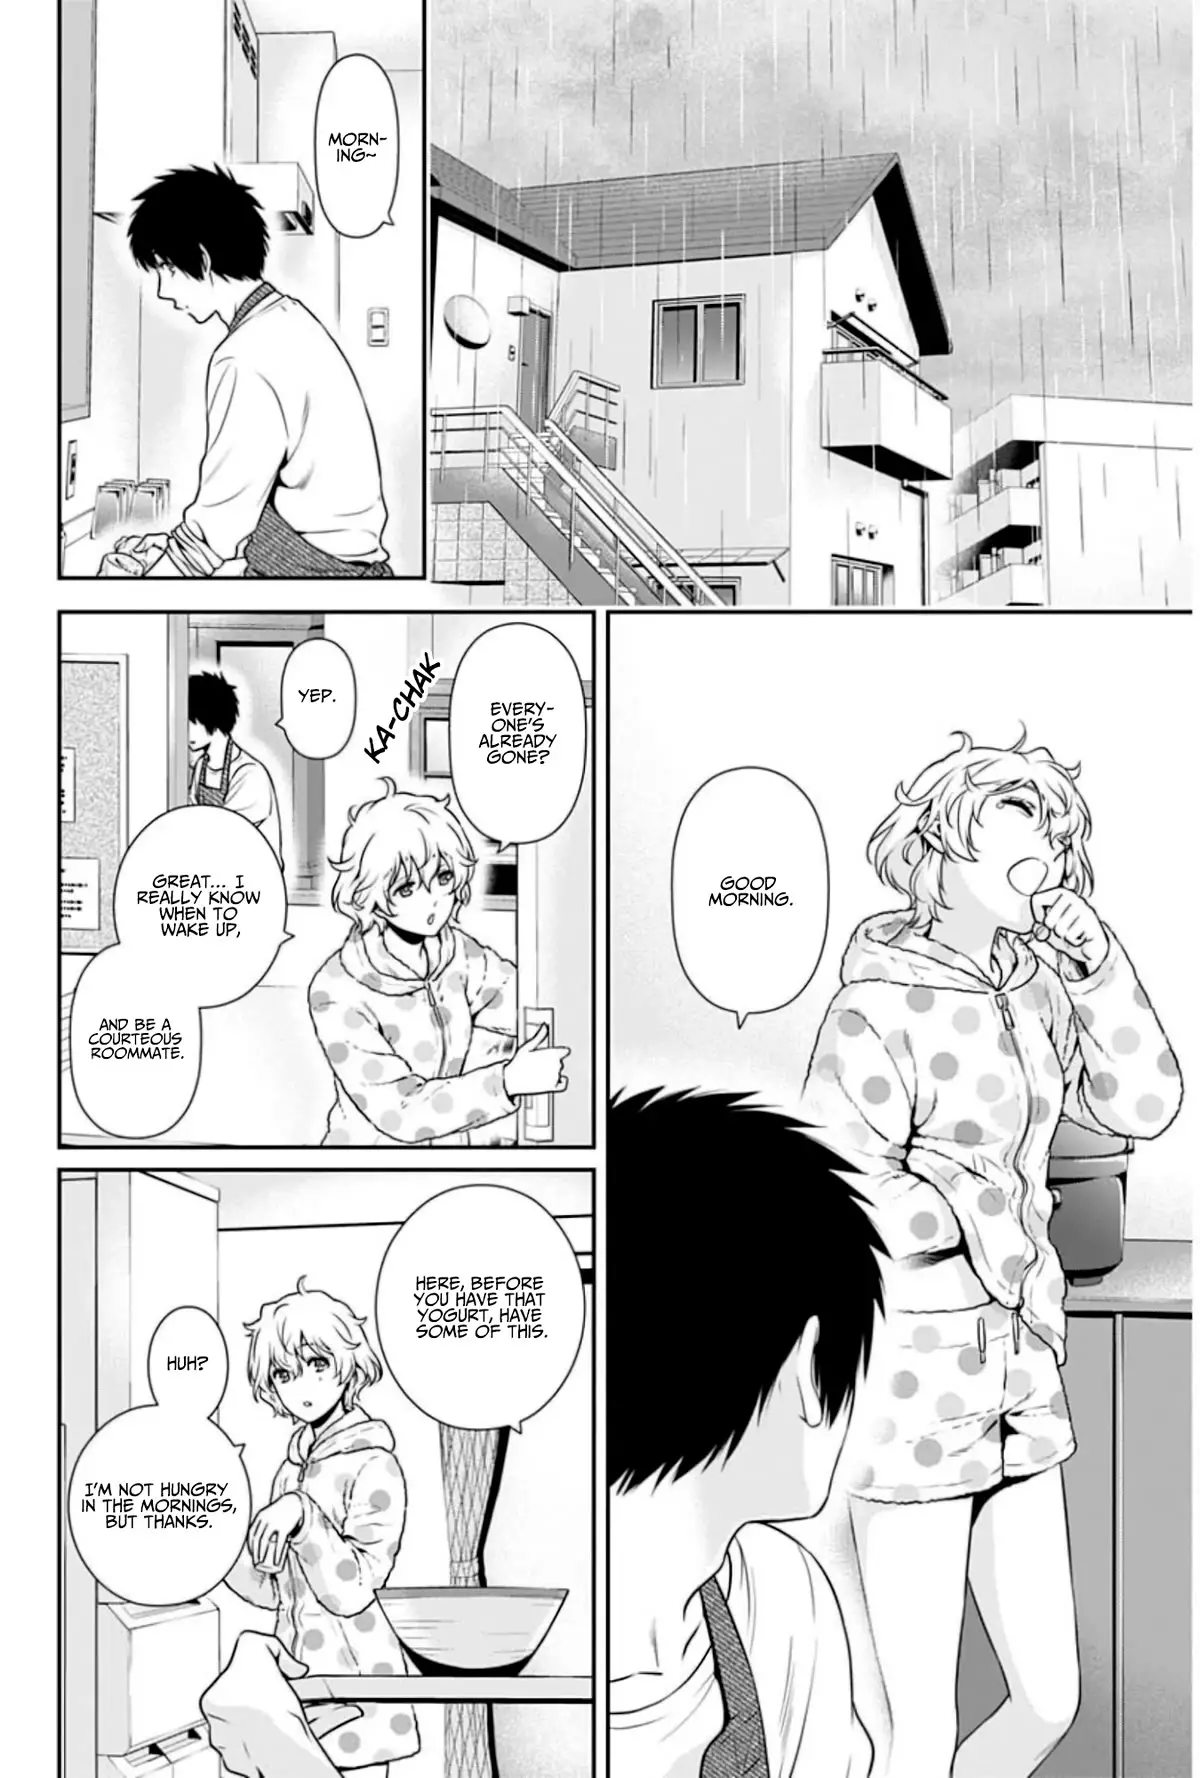 Can I Live With You? - 4 page 20-4a92b4c7